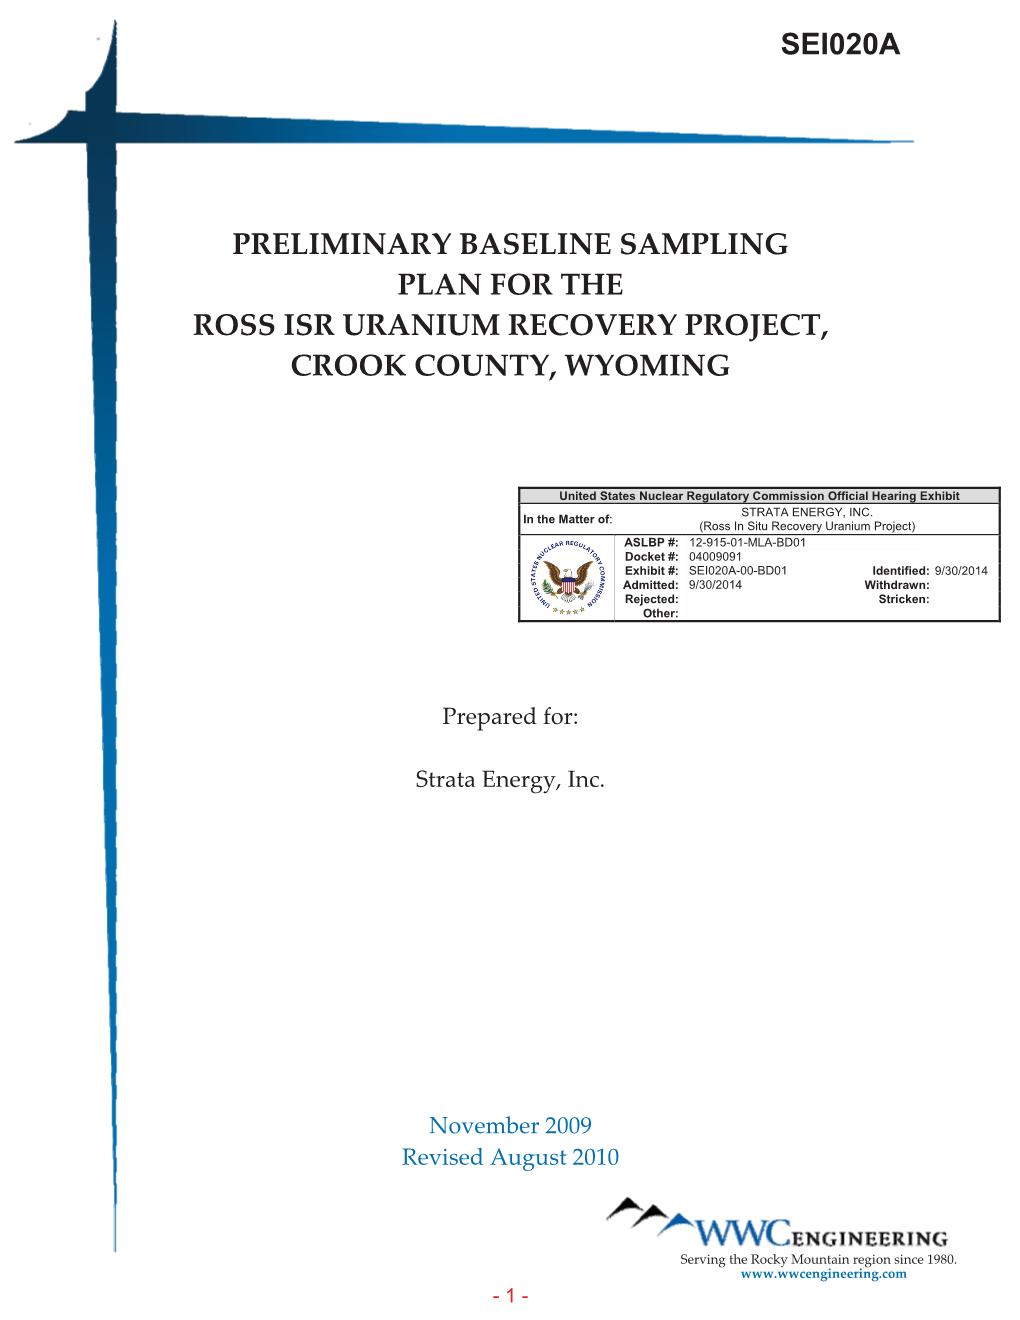 Preliminary Baseline Sampling Plan for the Ross Isr Uranium Recovery Project, Crook County, Wyoming